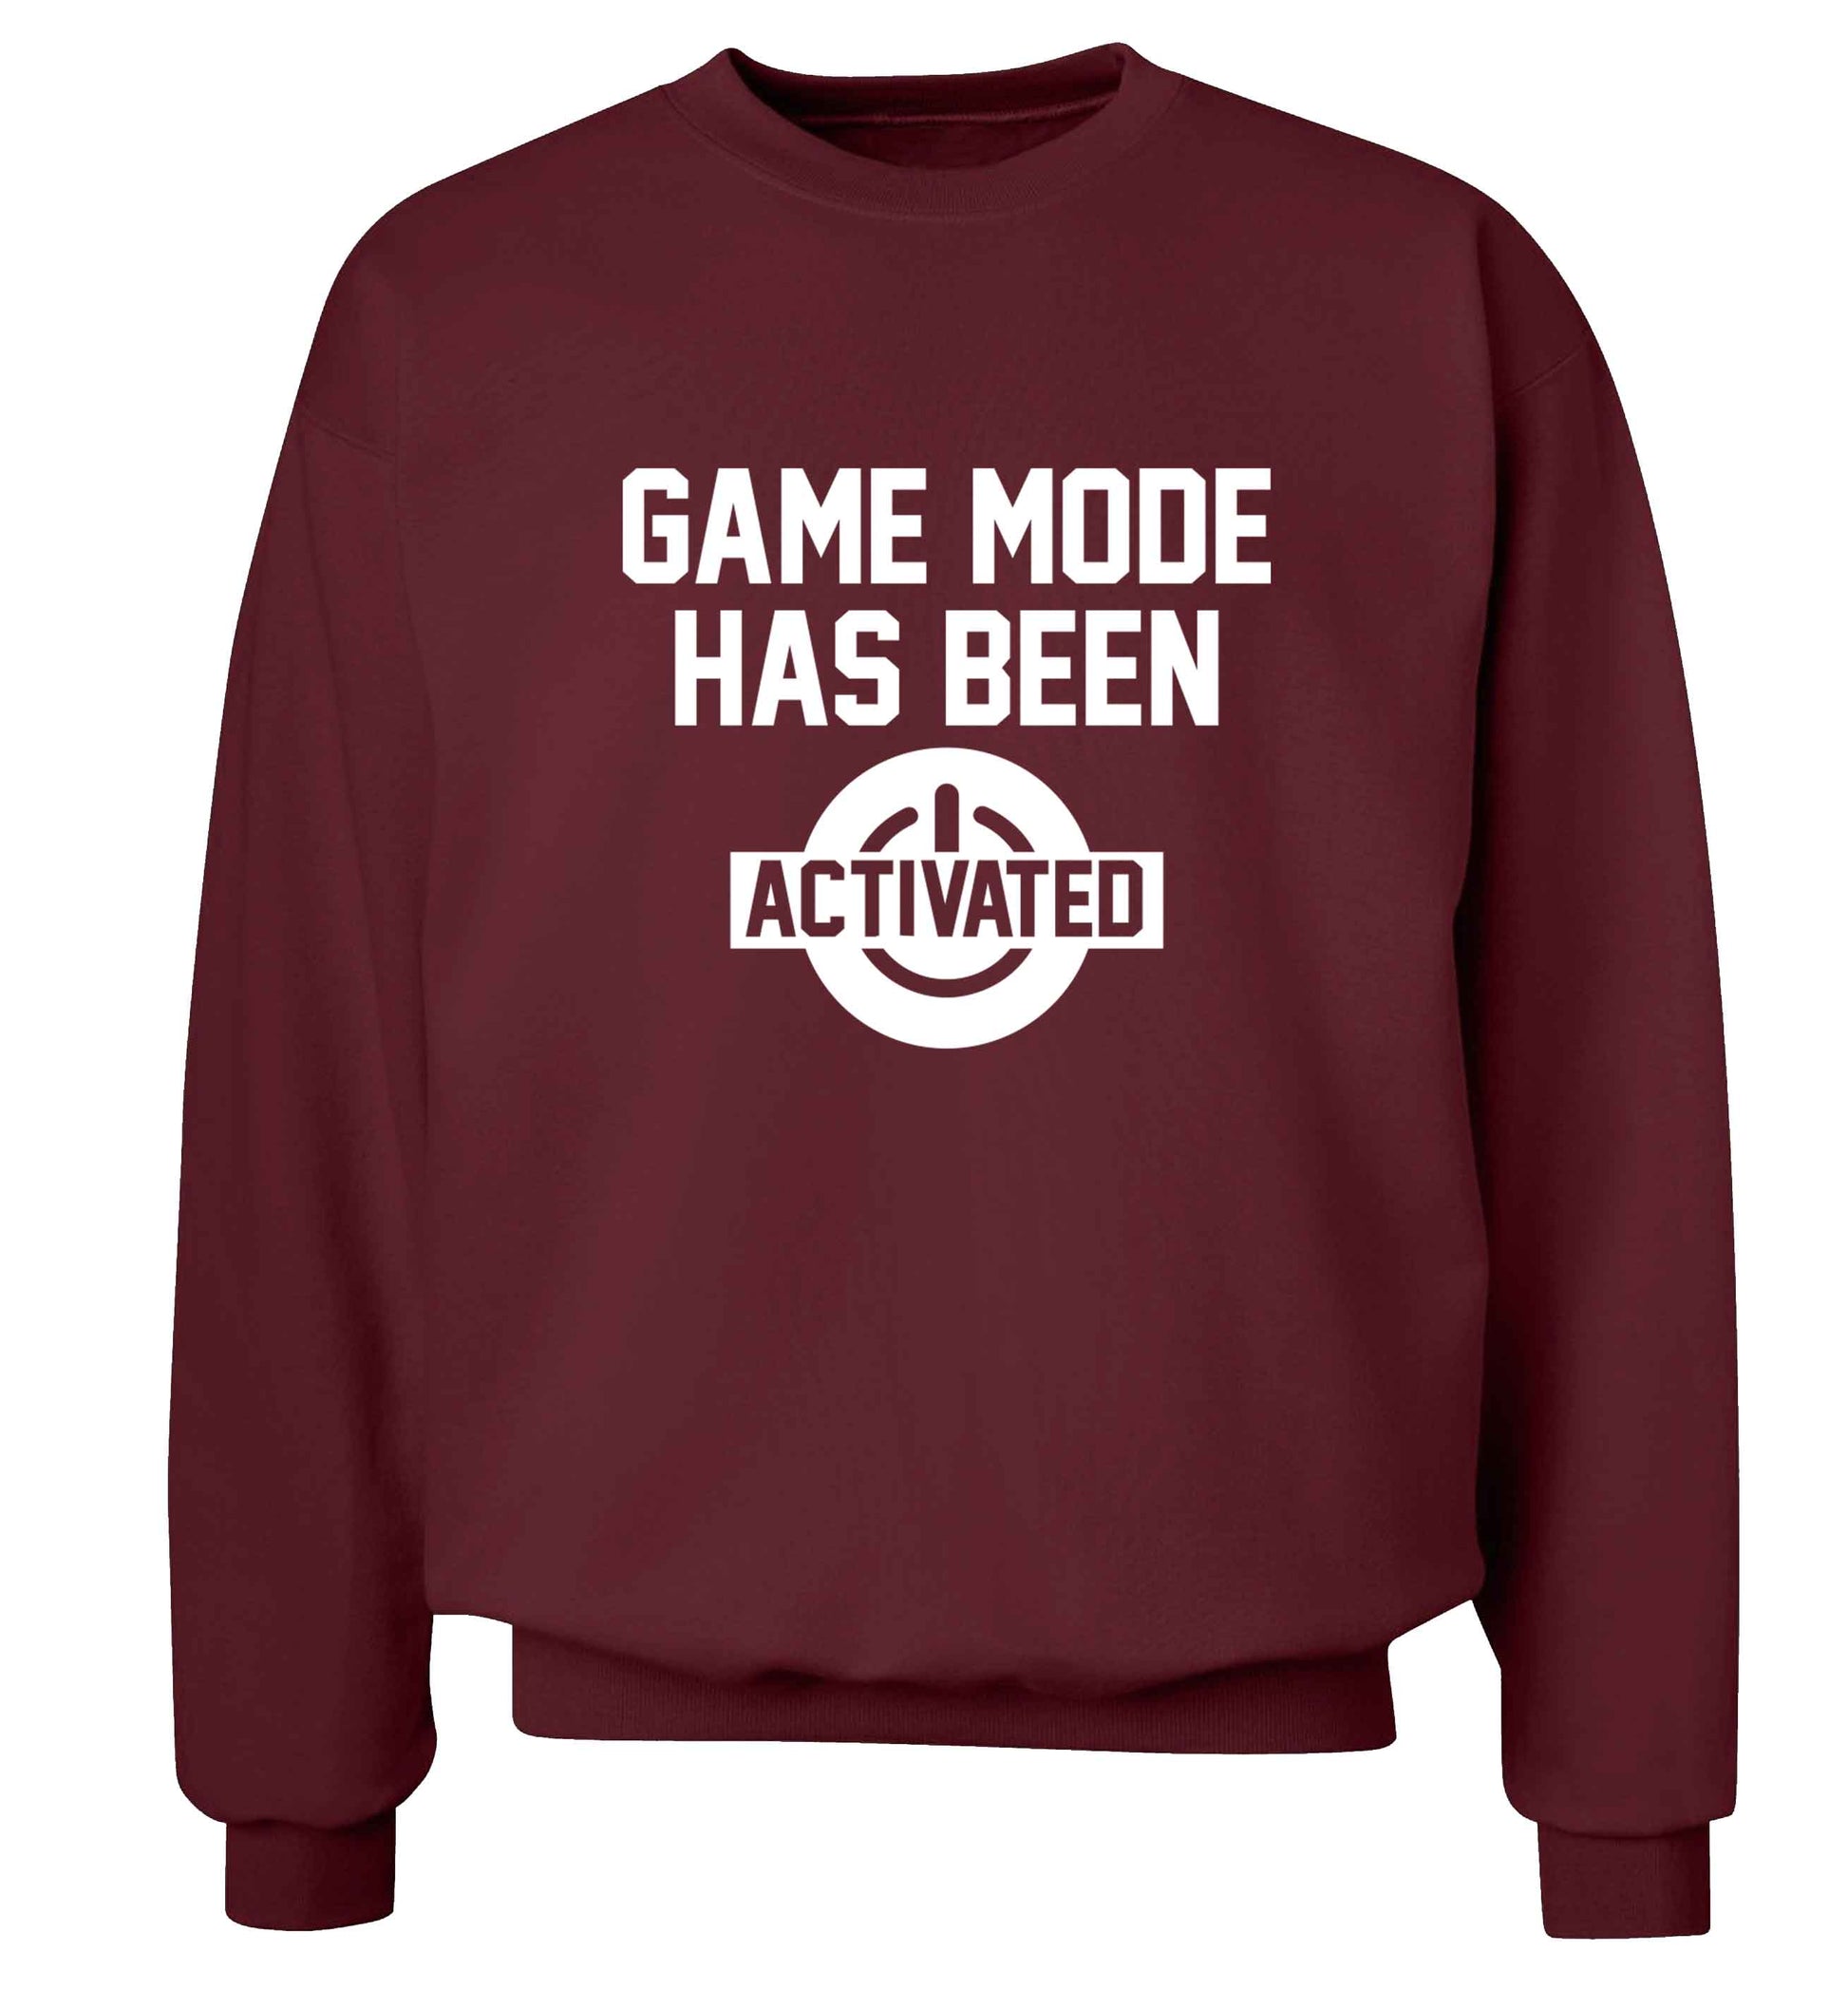 Game mode has been activated adult's unisex maroon sweater 2XL